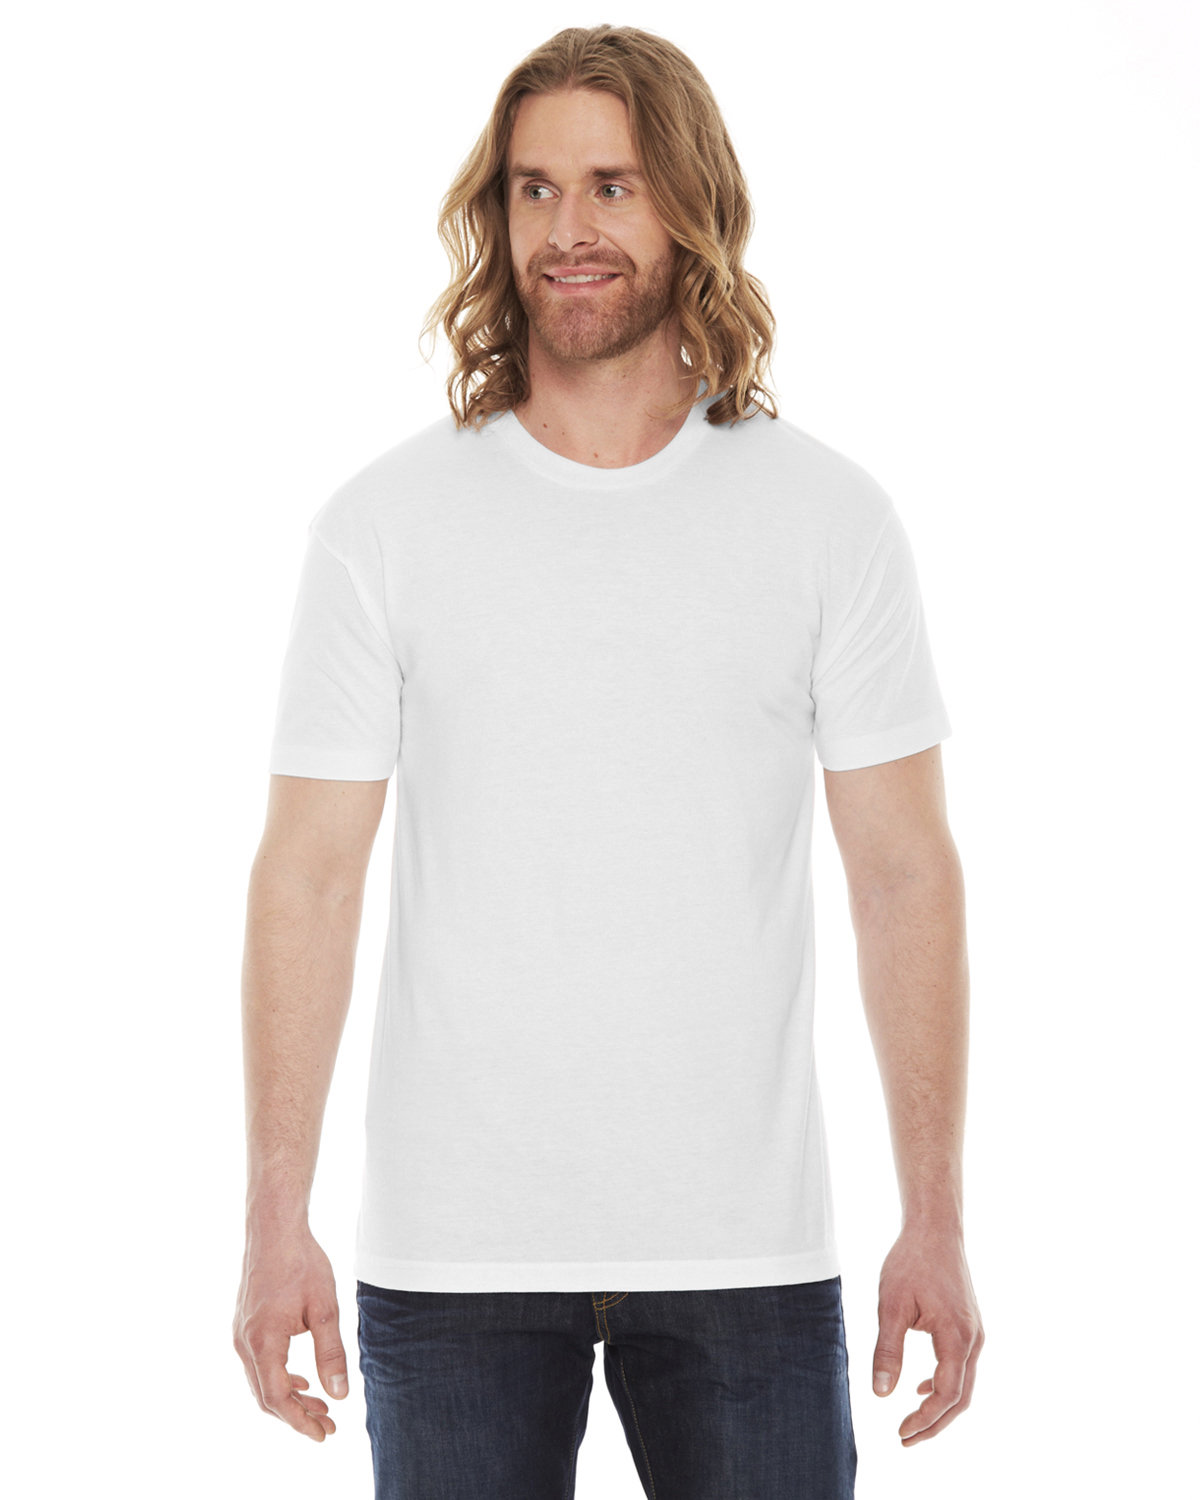 Front view of Unisex Poly-Cotton Short-Sleeve Crewneck